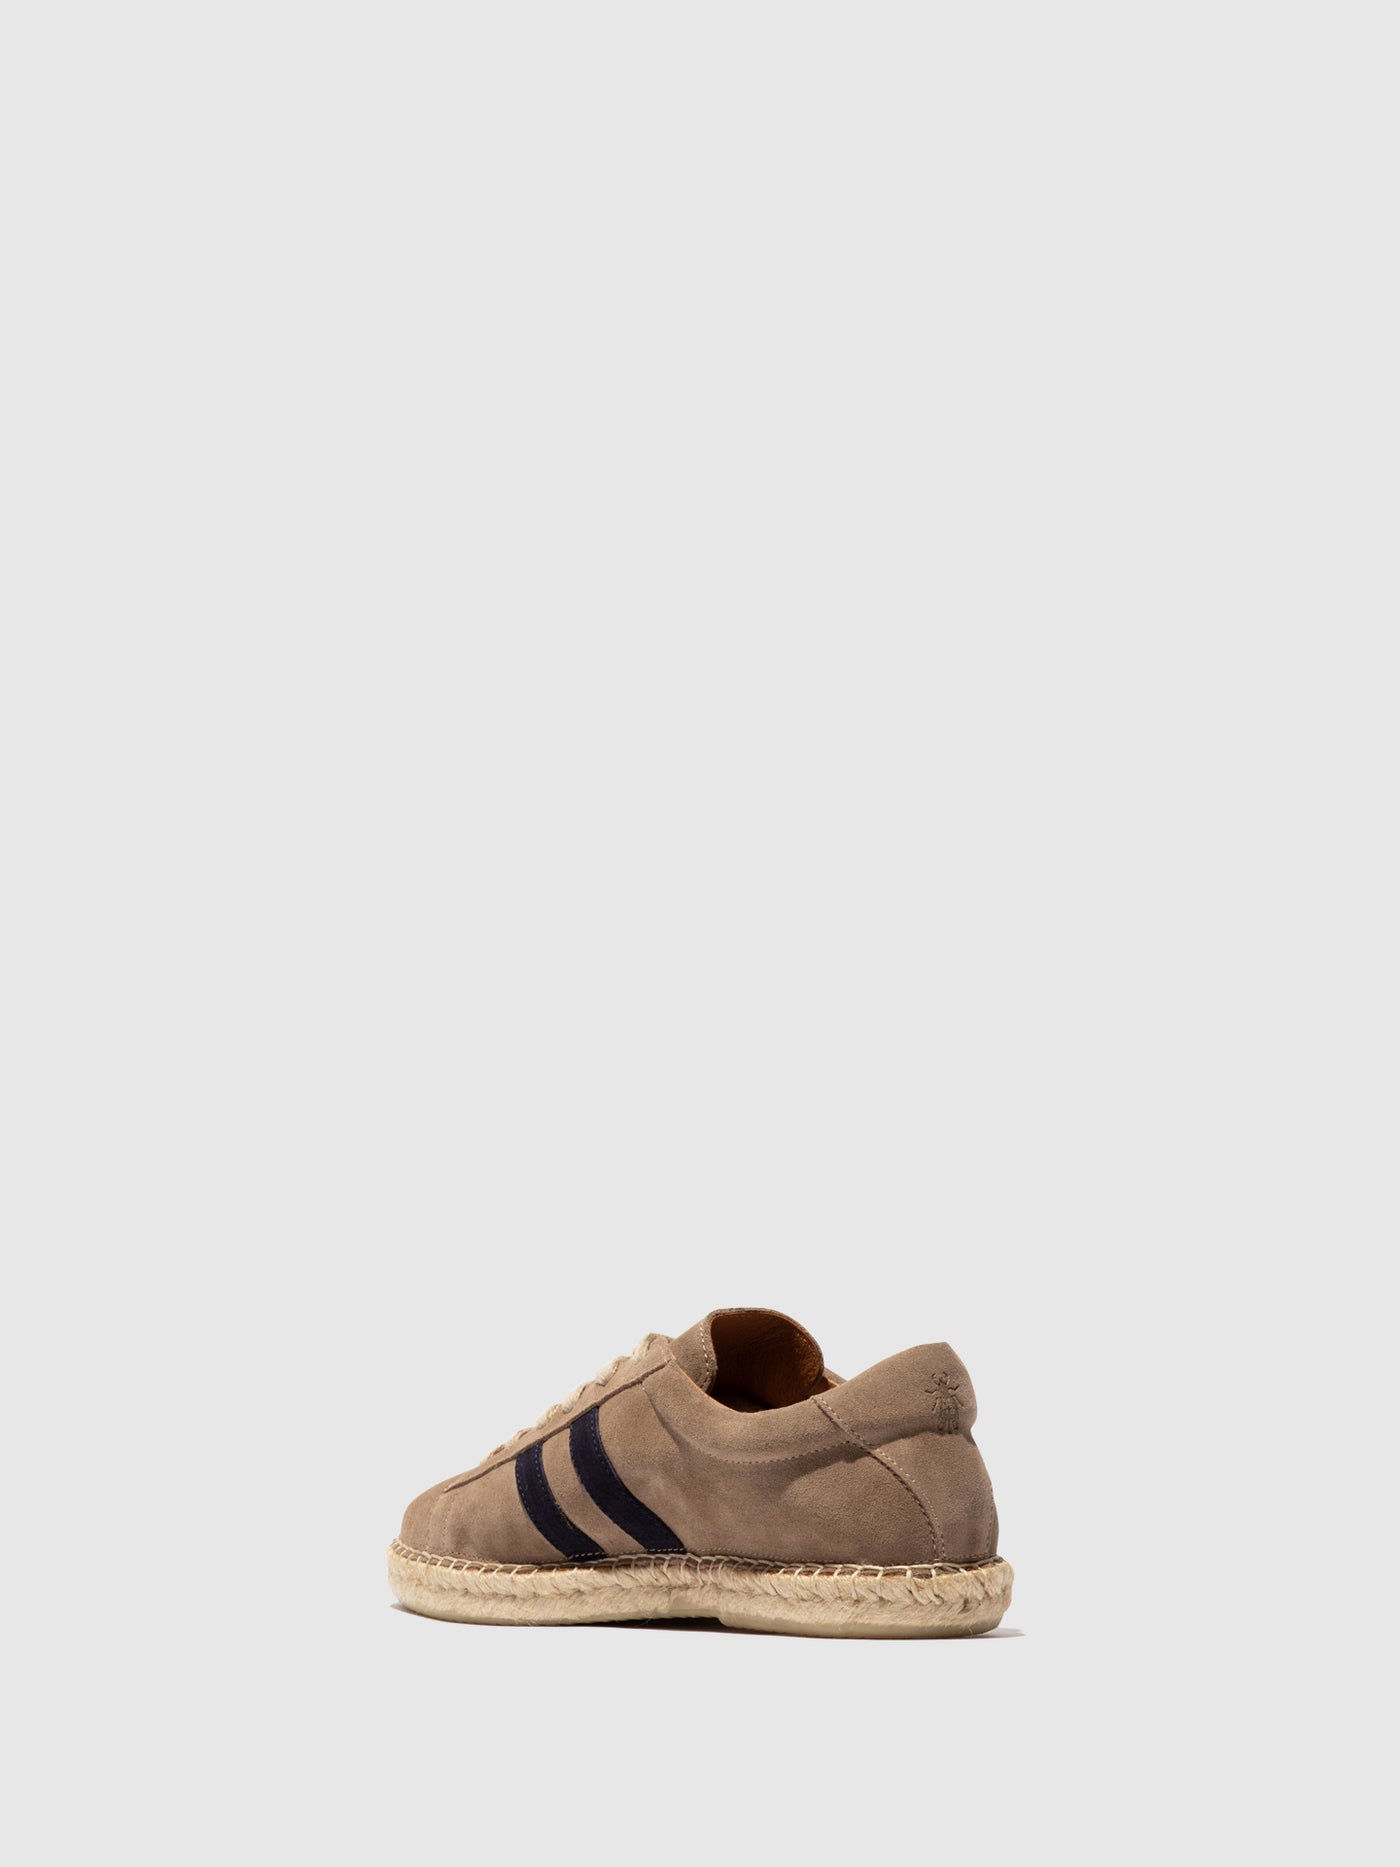 Lace-up Espadrilles SCAM529FLY SAND/NAVY